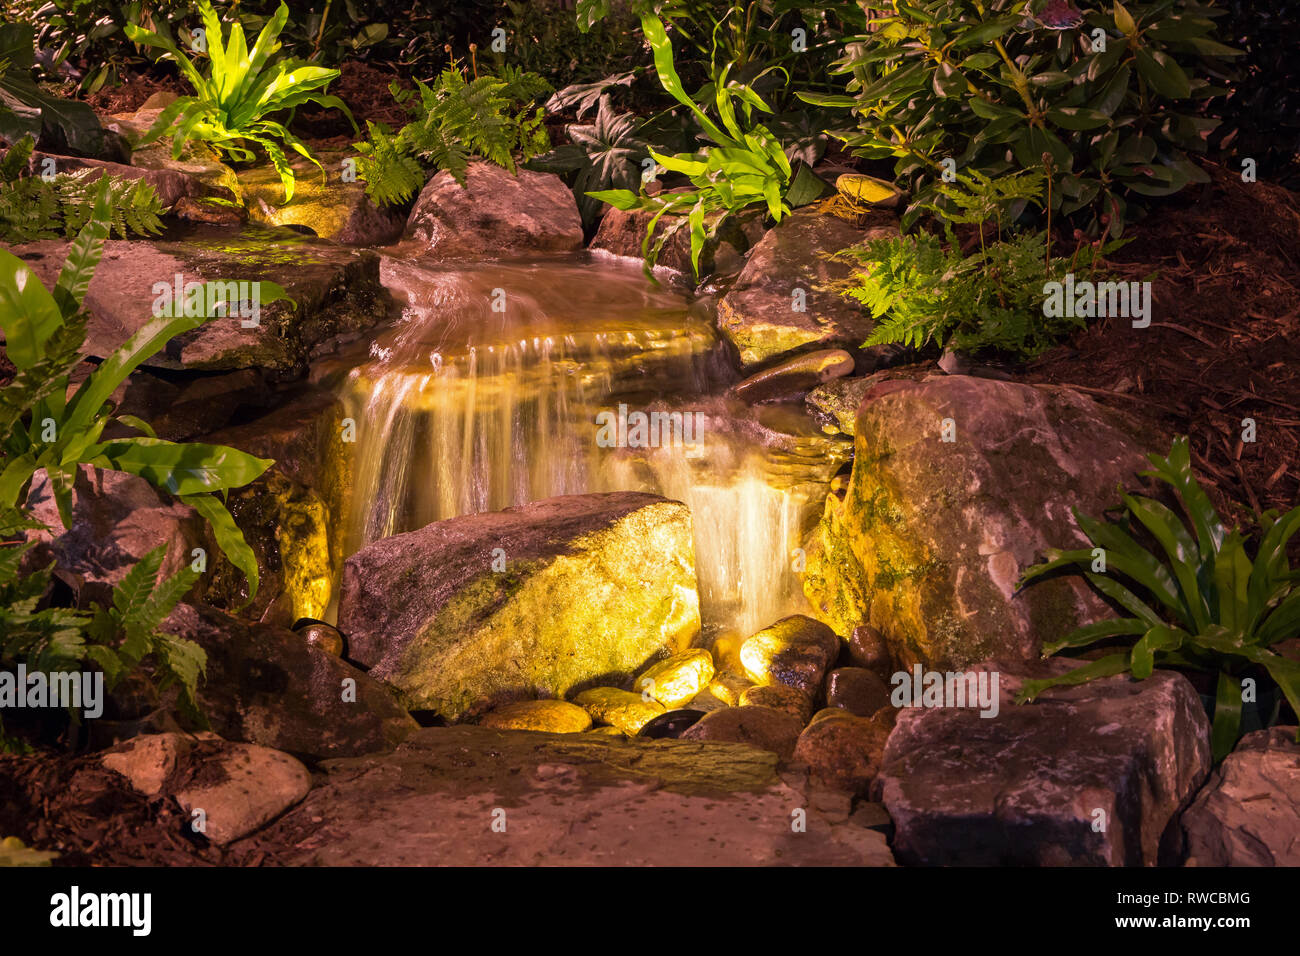 Natural landscape design featuring waterfalls, plants and dramatic lighting. Stock Photo